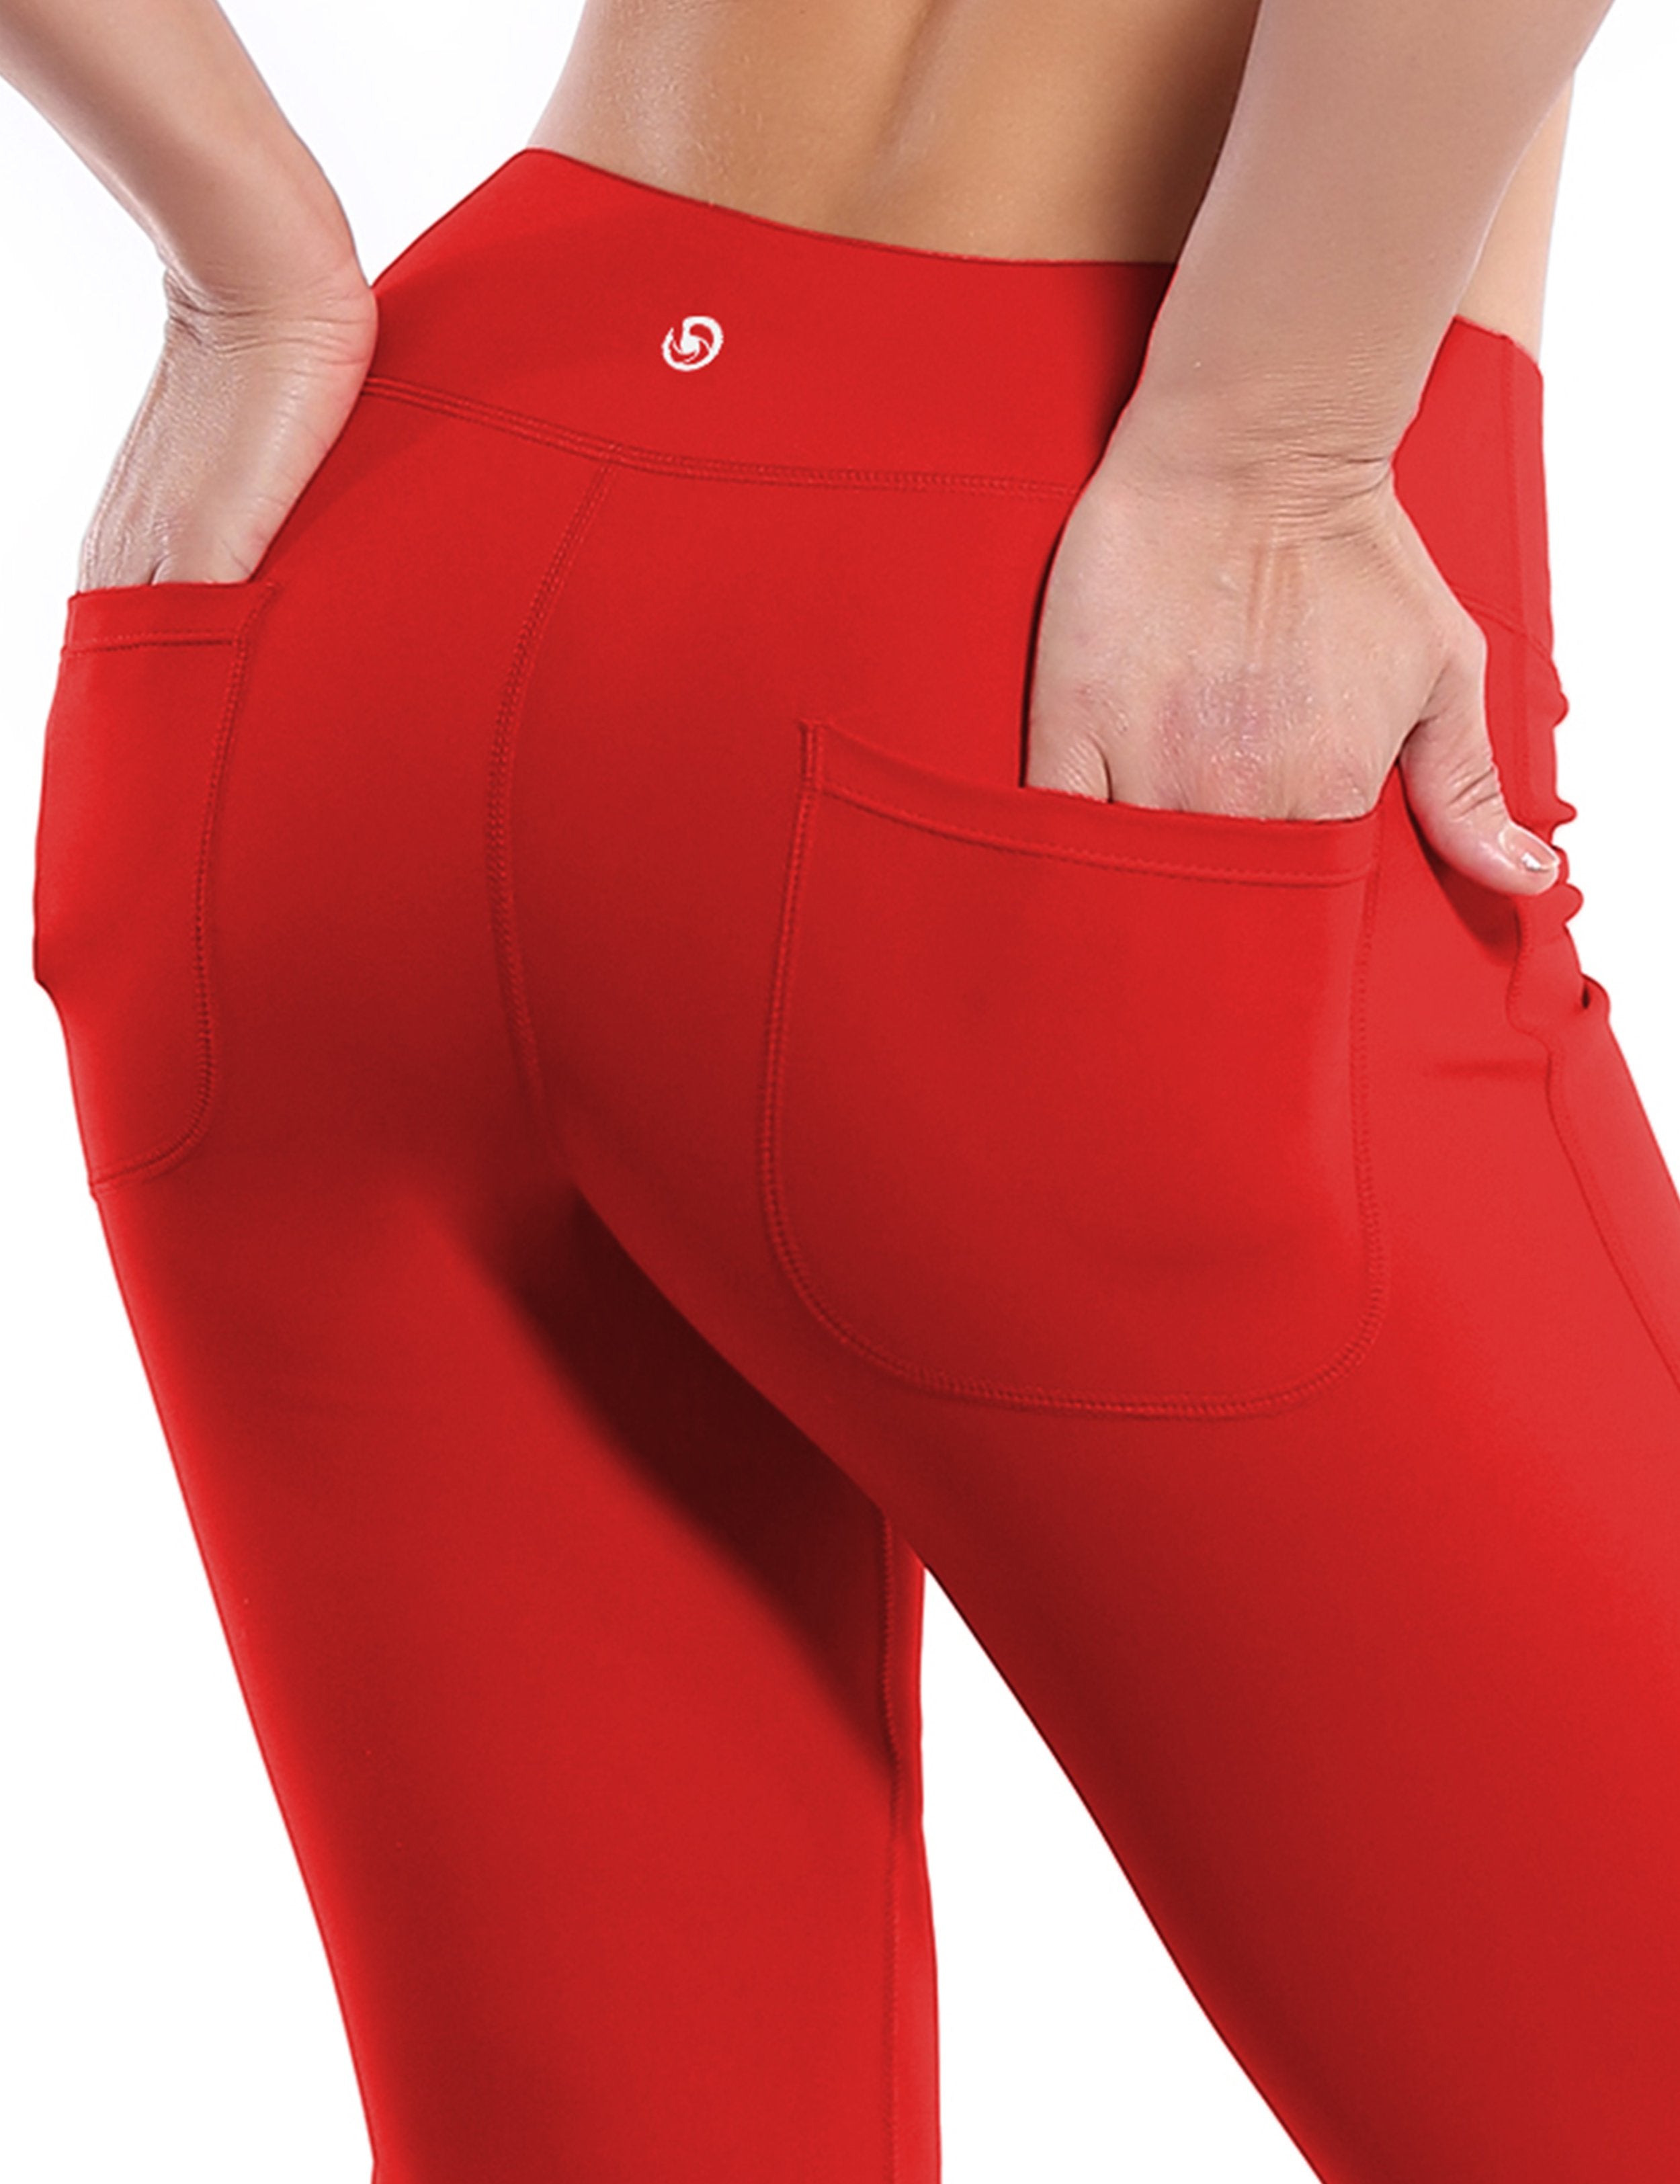 29 31 33 35 Bootcut Leggings with Pockets scarlet ins_yoga – bubblelime